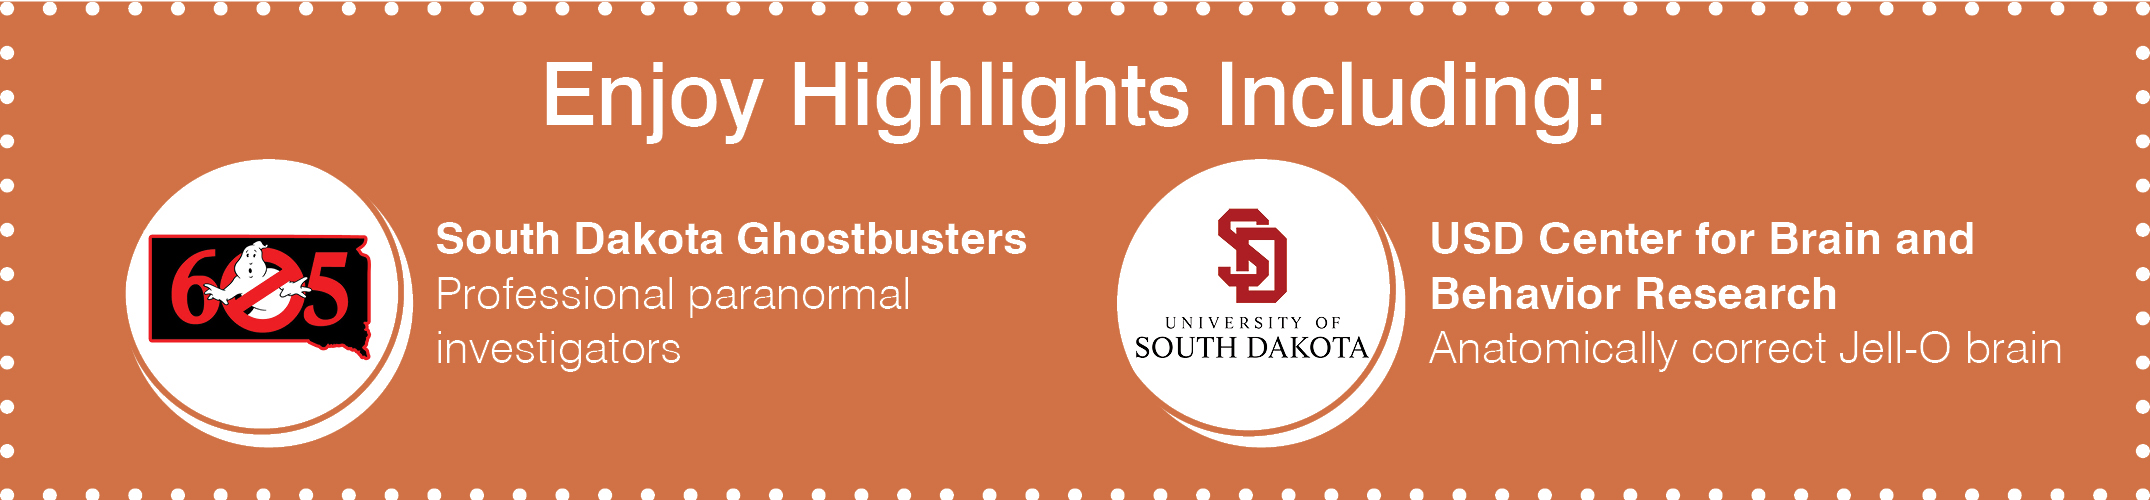 Enjoy Highlights: SD Ghostbusters & USD Center for Brain and Behavior Research